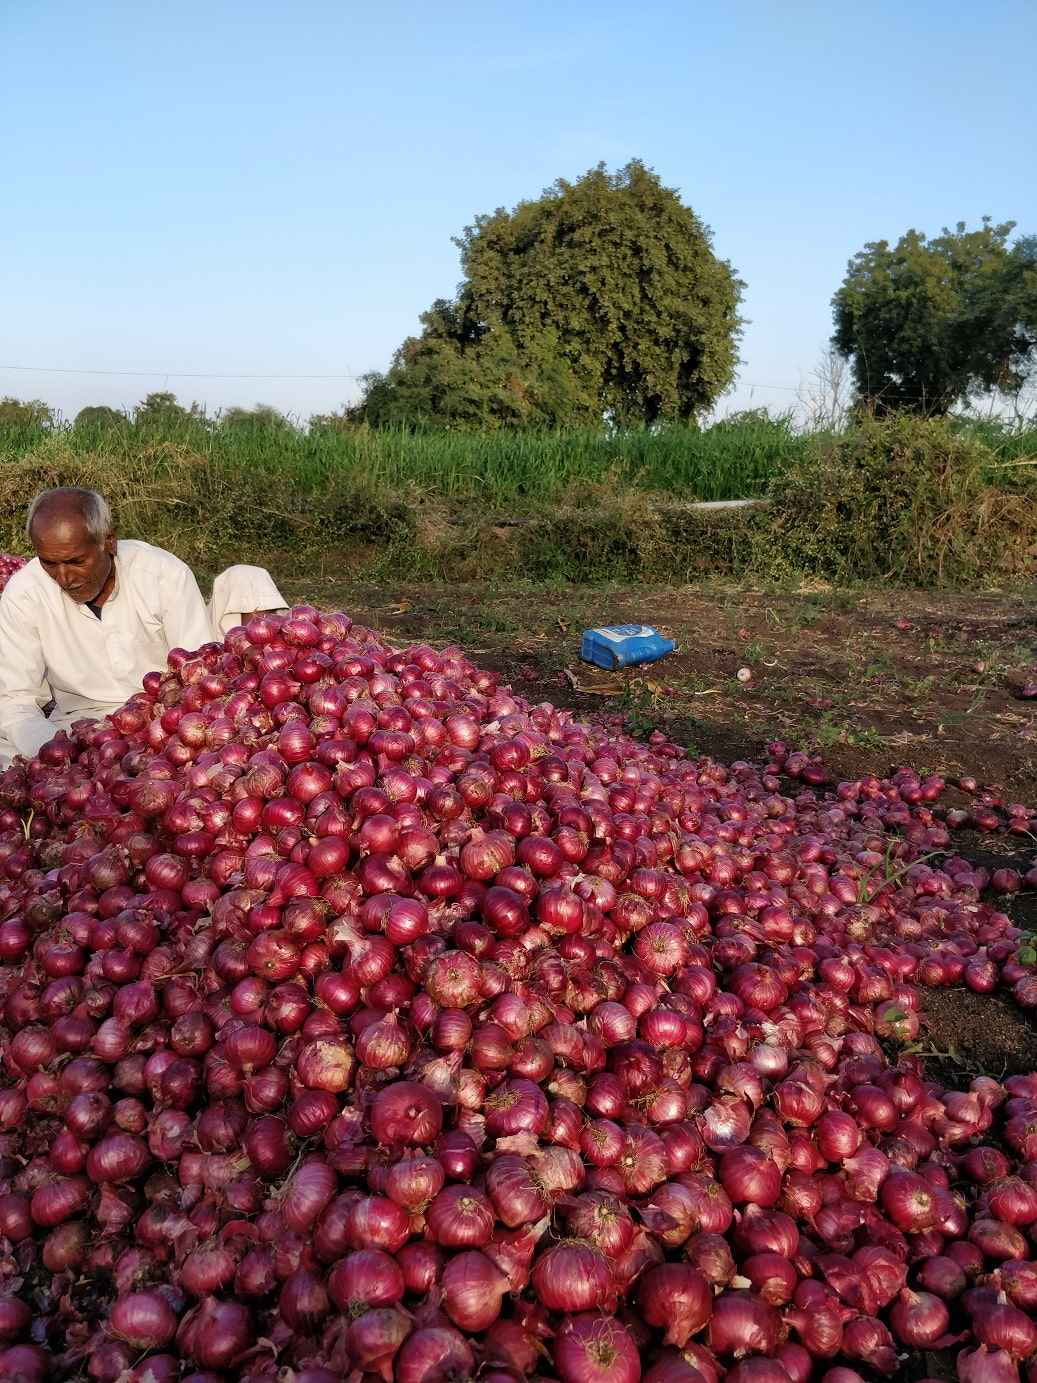 An elderly farmer man sits behind a large pile of red onions in a field (Author 2018)